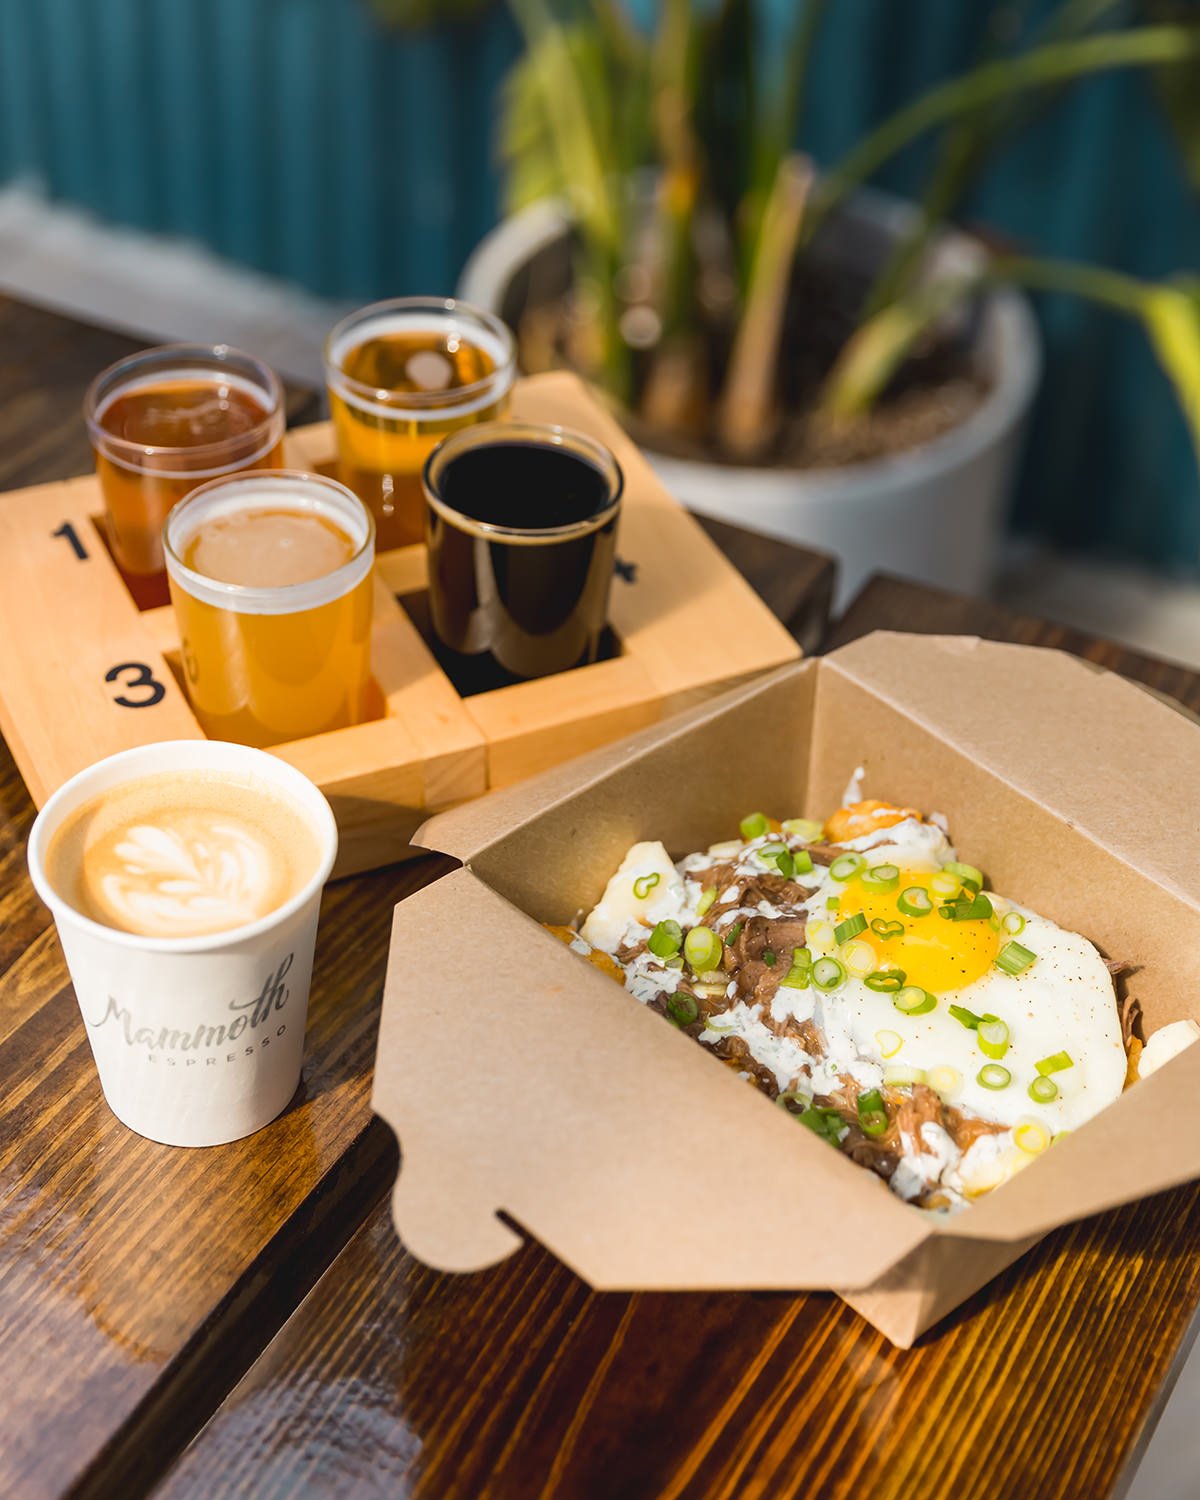 Breakfast Poutine from Hatch + Harvest, a Mammoth coffee, and a flight of Miel beer